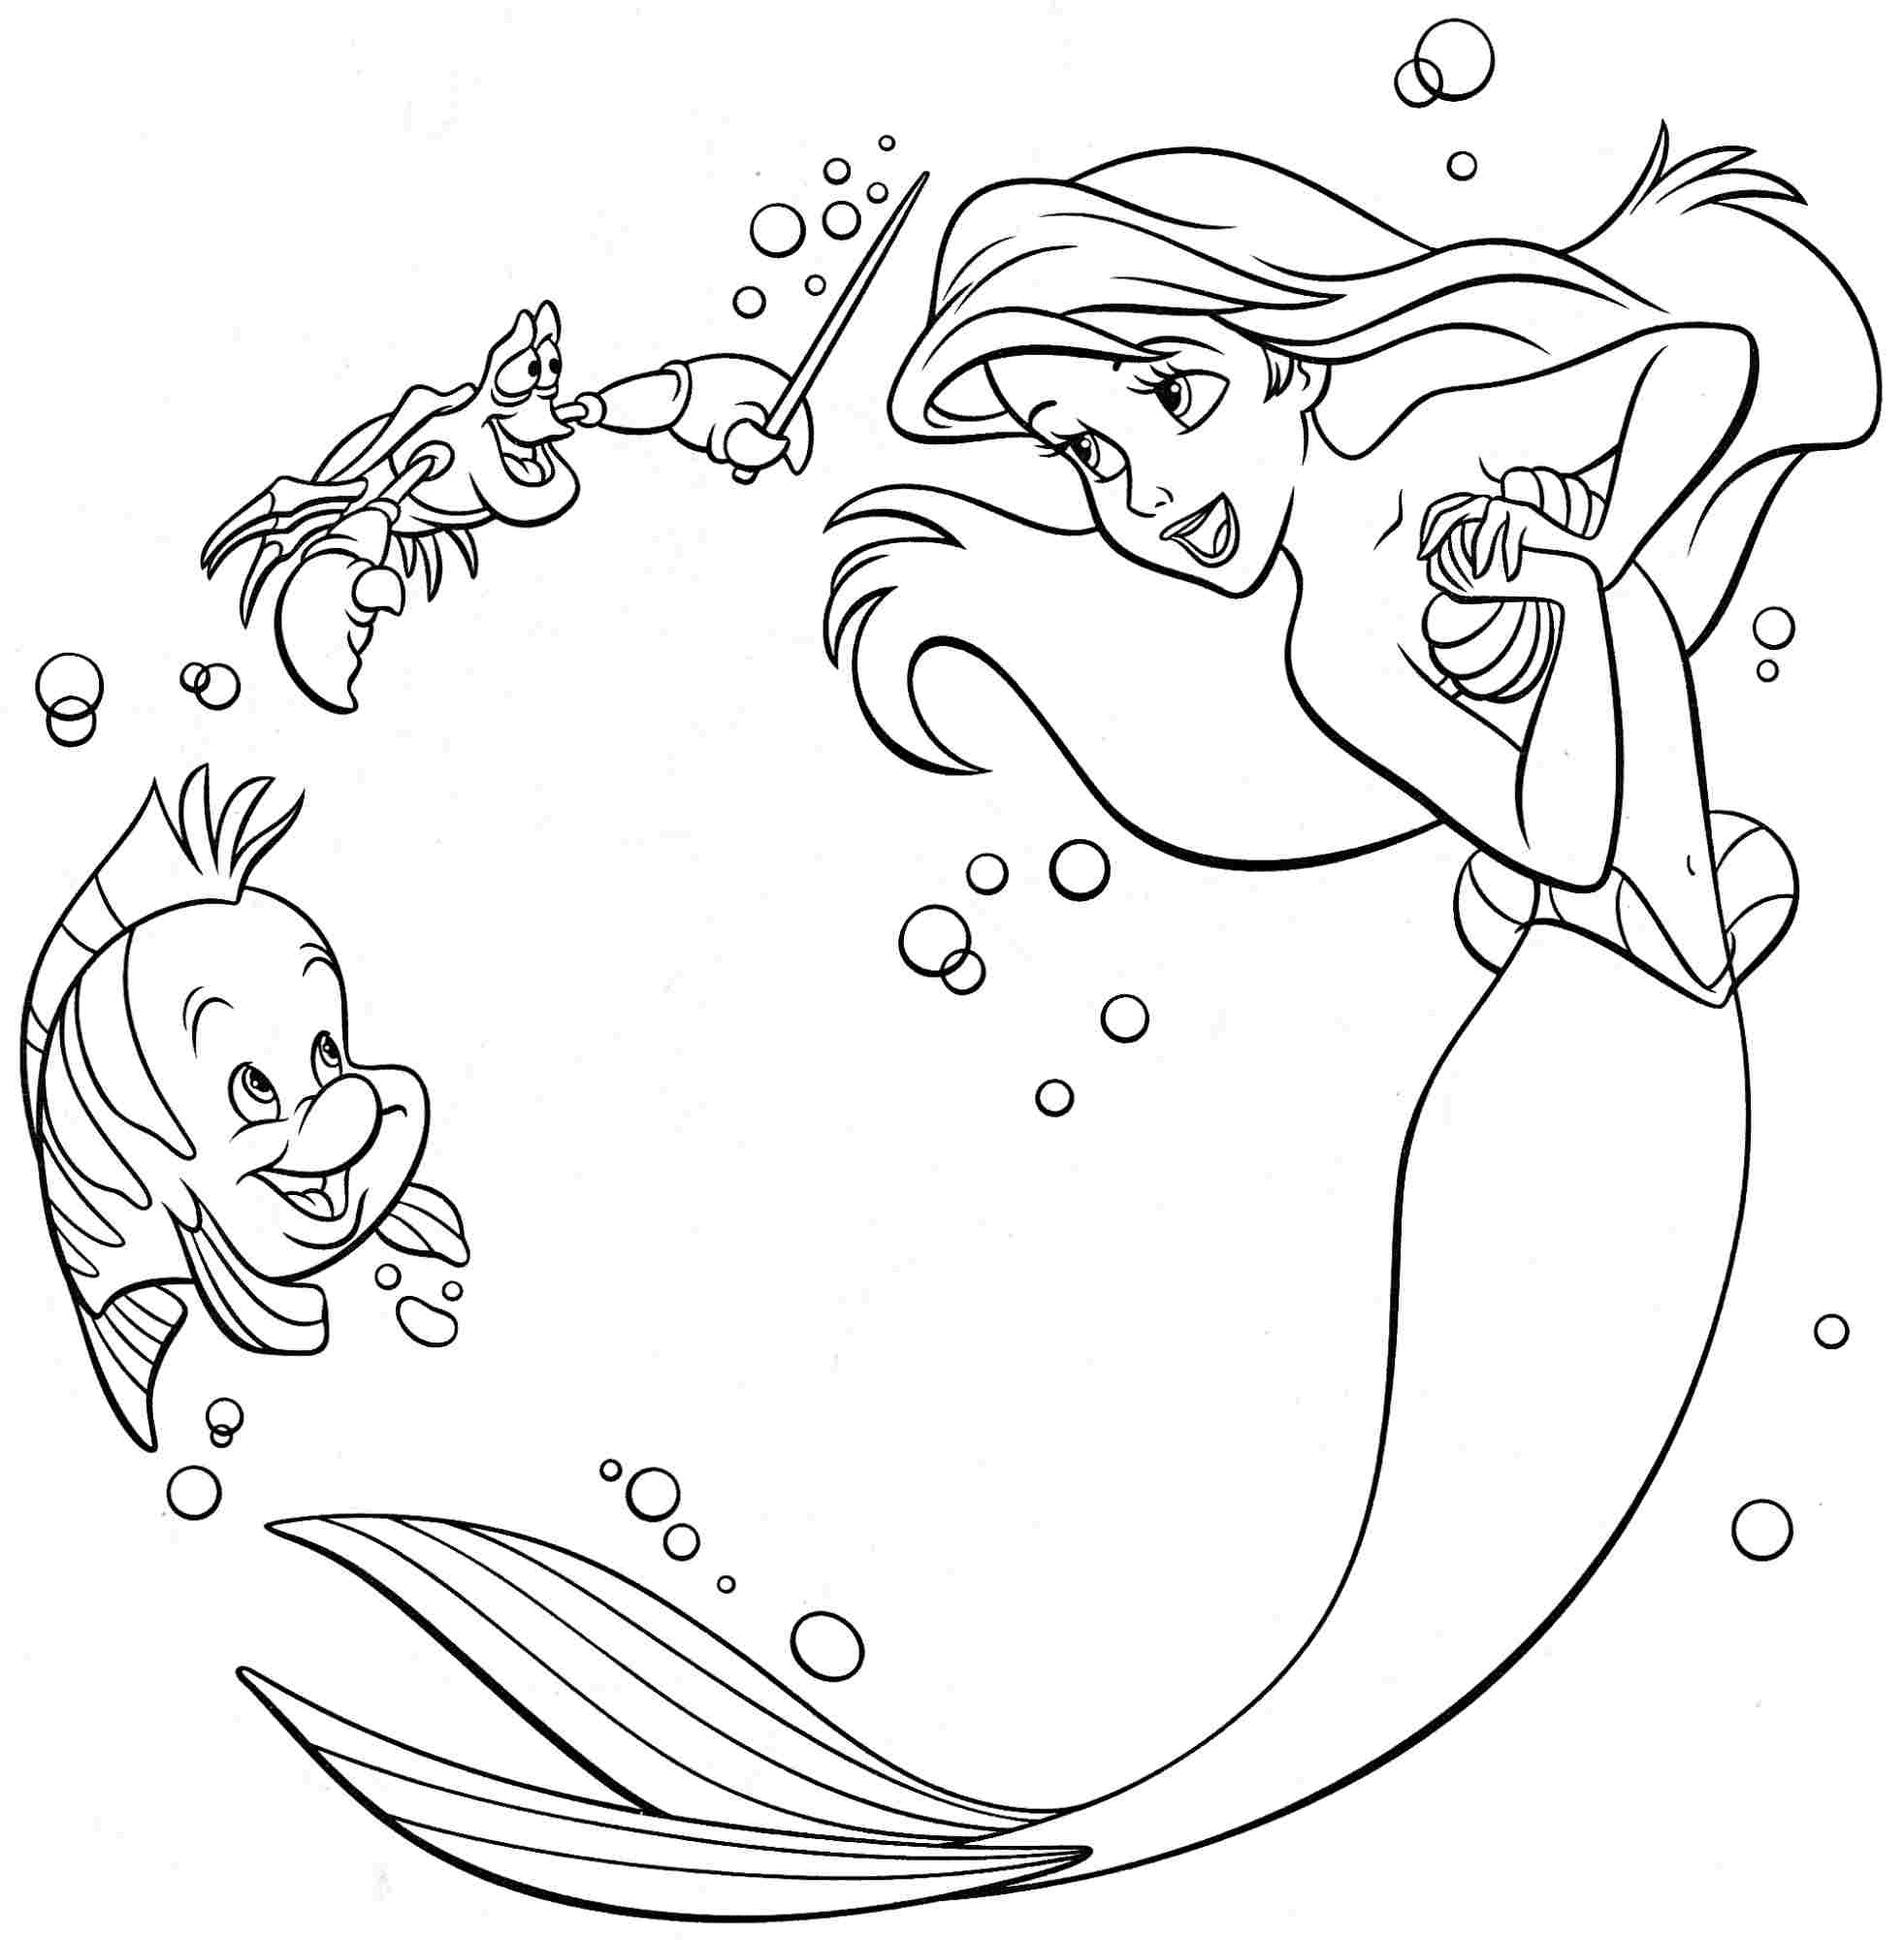 Ariel Coloring Page - Coloring Pages For All Ages